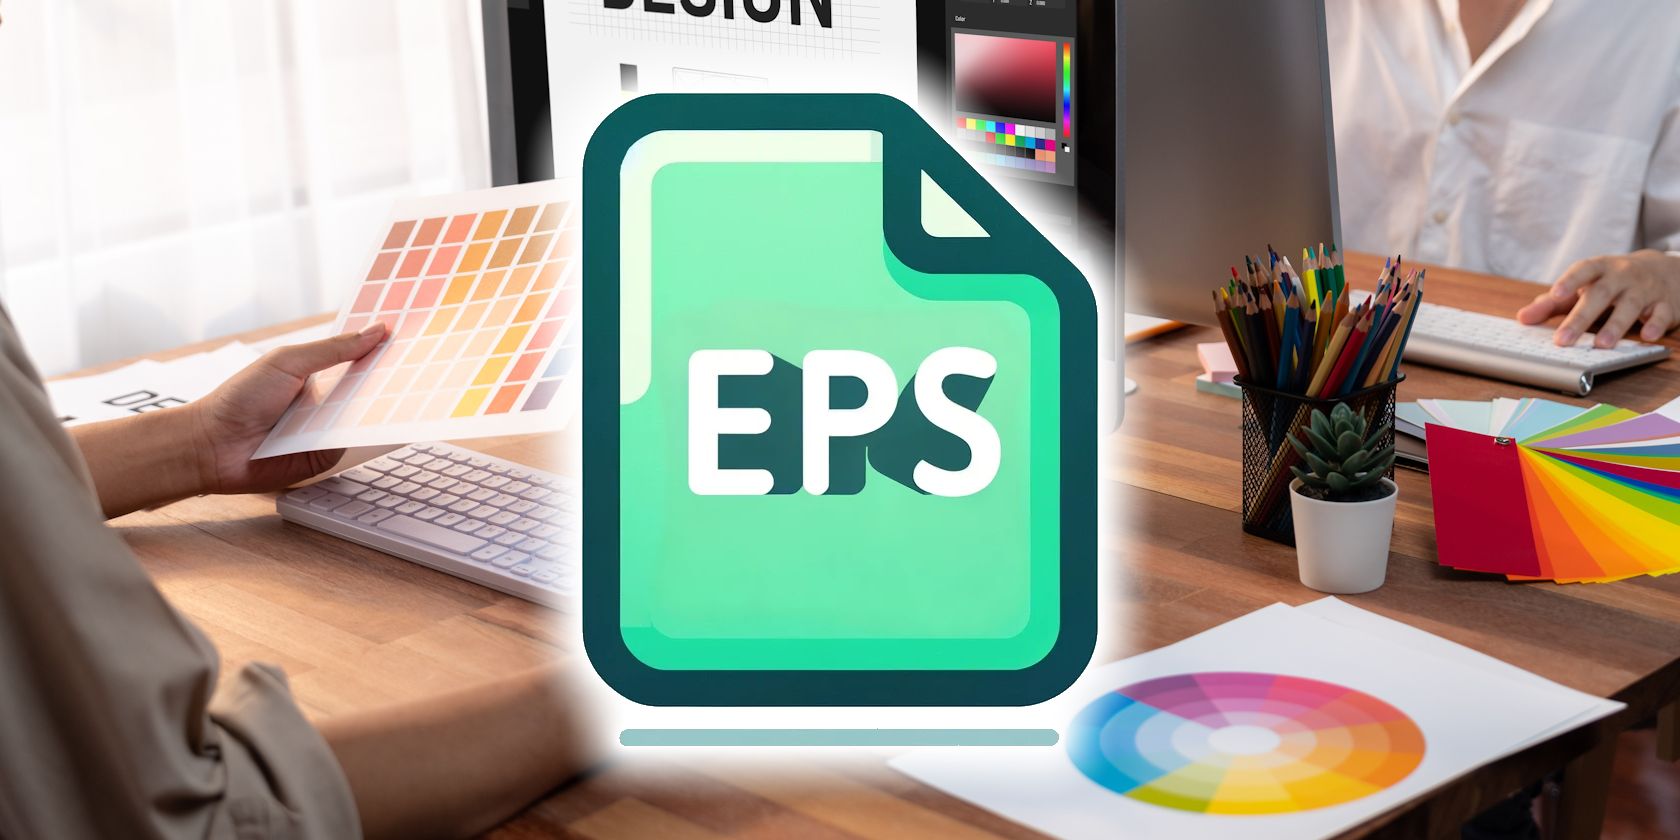 What Is an EPS File? How to Open It